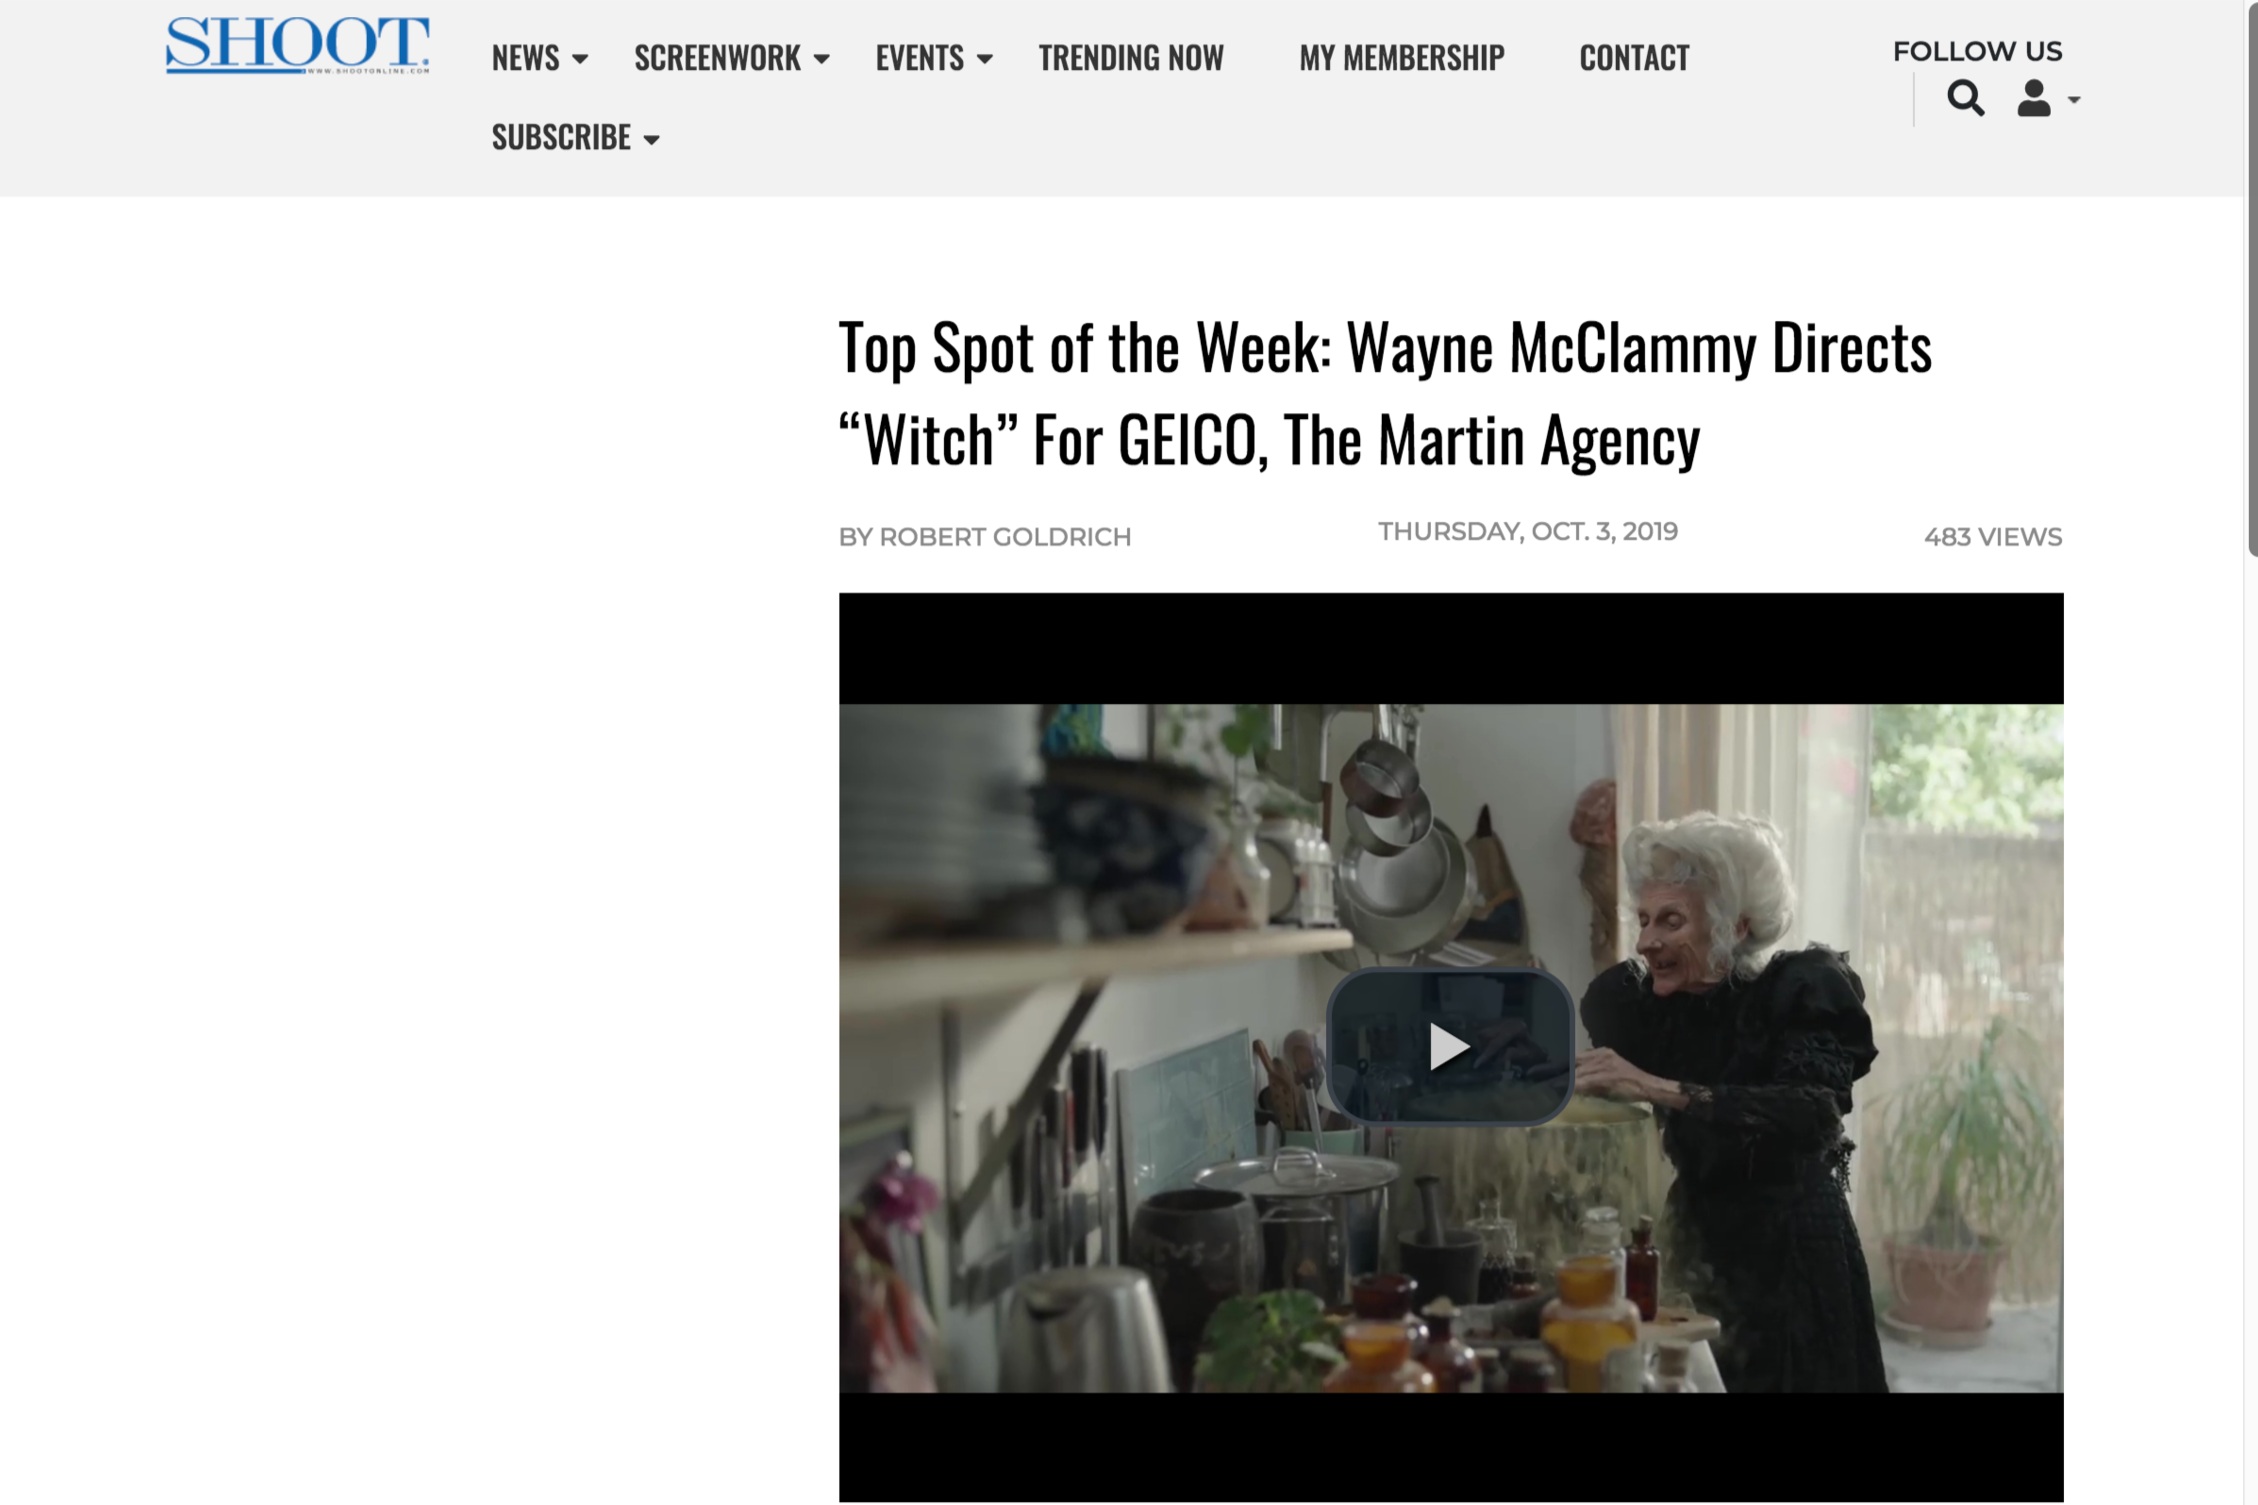 Top Spot of the Week: Wayne McClammy Directs “Witch” For GEICO, The Martin Agency